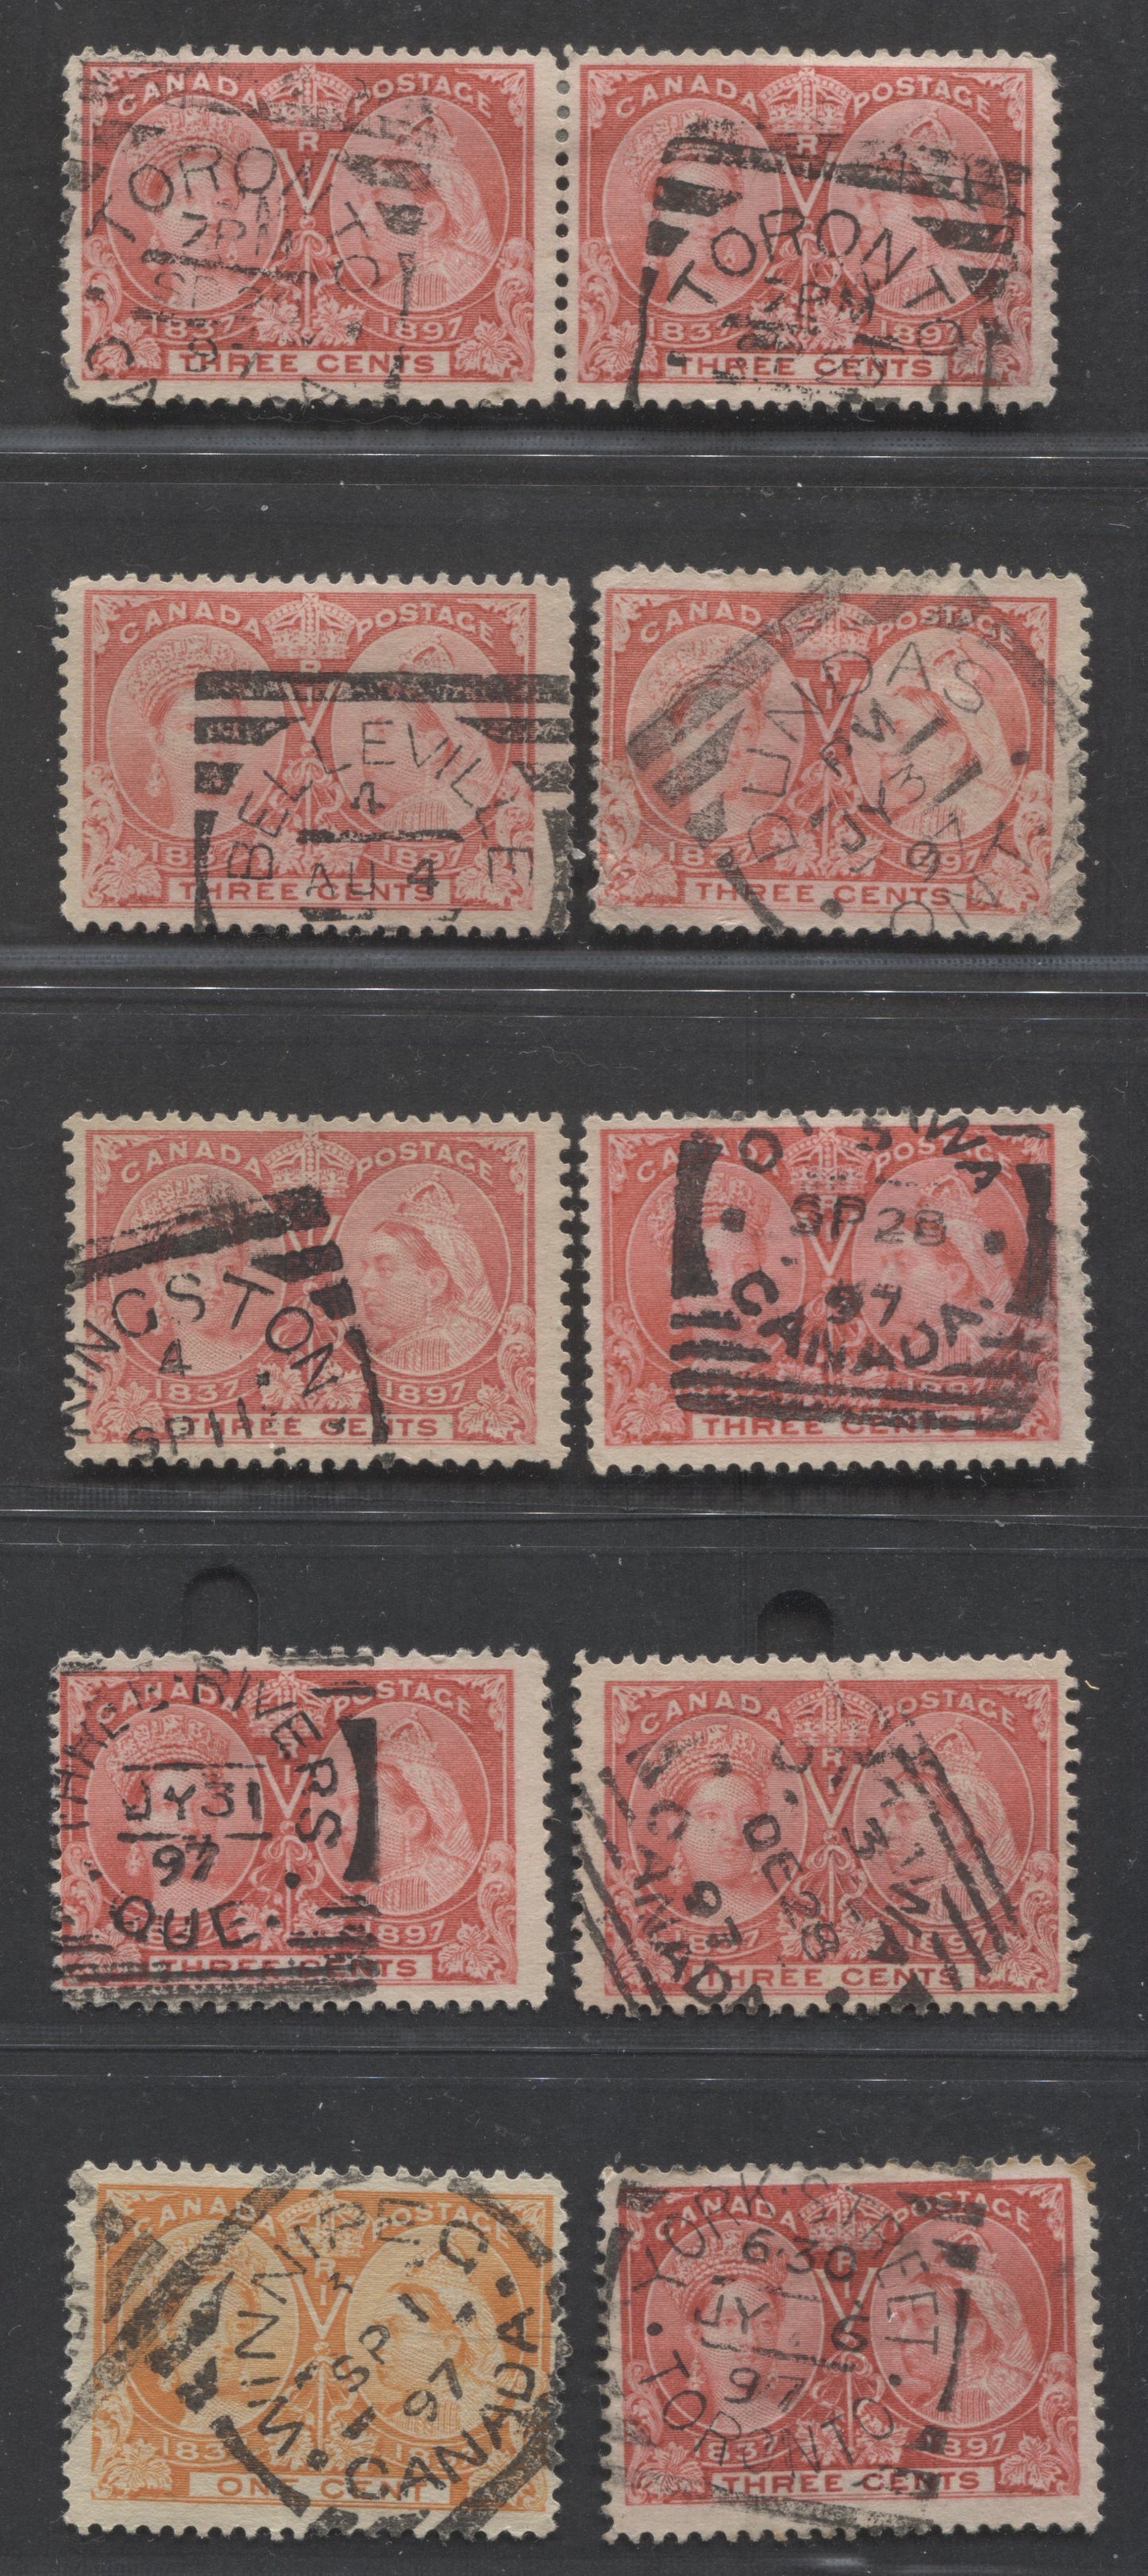 Lot 243 Canada #51, 53, 53i 1c, 3c Orange, Bright Rose & Pale Rose Queen Victoria, 1897 Diamond Jubilee Issue, 8 Fine Used Singles & 1 Pair, With Full, Or Partial Dated Strikes of Squared Circle Town Cancels